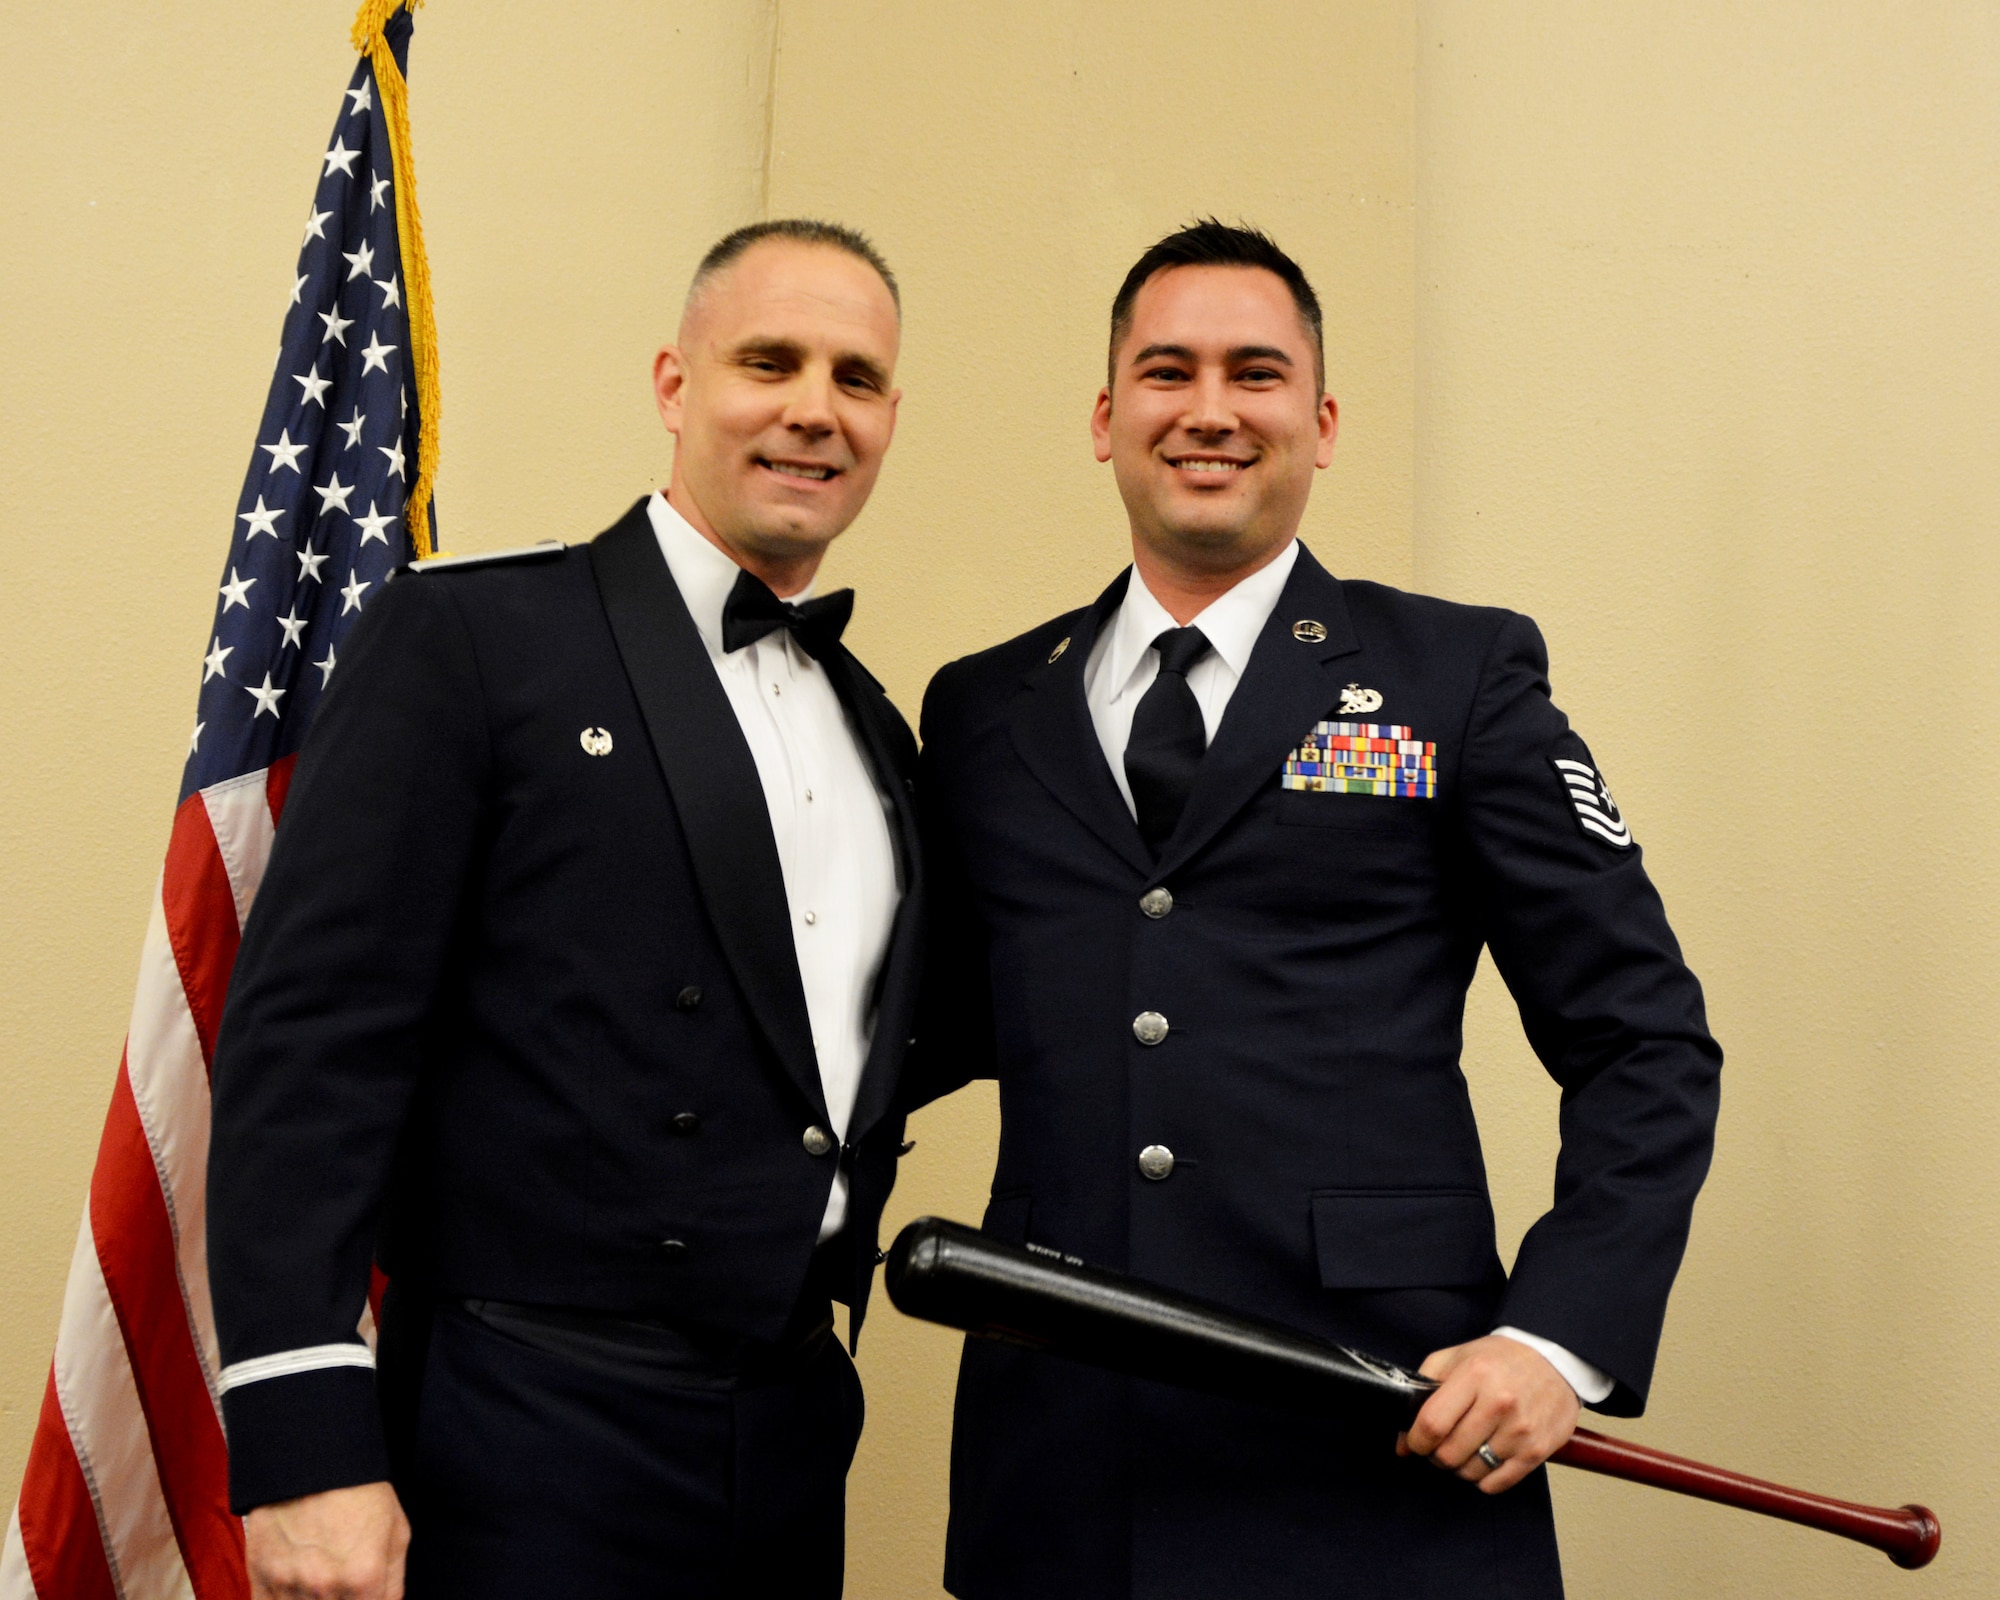 Maj. Randy Starnes, 507th Aircraft Maintenance Squadron commander, presents the 2018 507th AMXS Heavy Hitter Award to Tech. Sgt. Michael Dunning March 2, 2019, Midwest City, Oklahoma. (U.S. Air Force photo by Maj. Jon Quinlan)